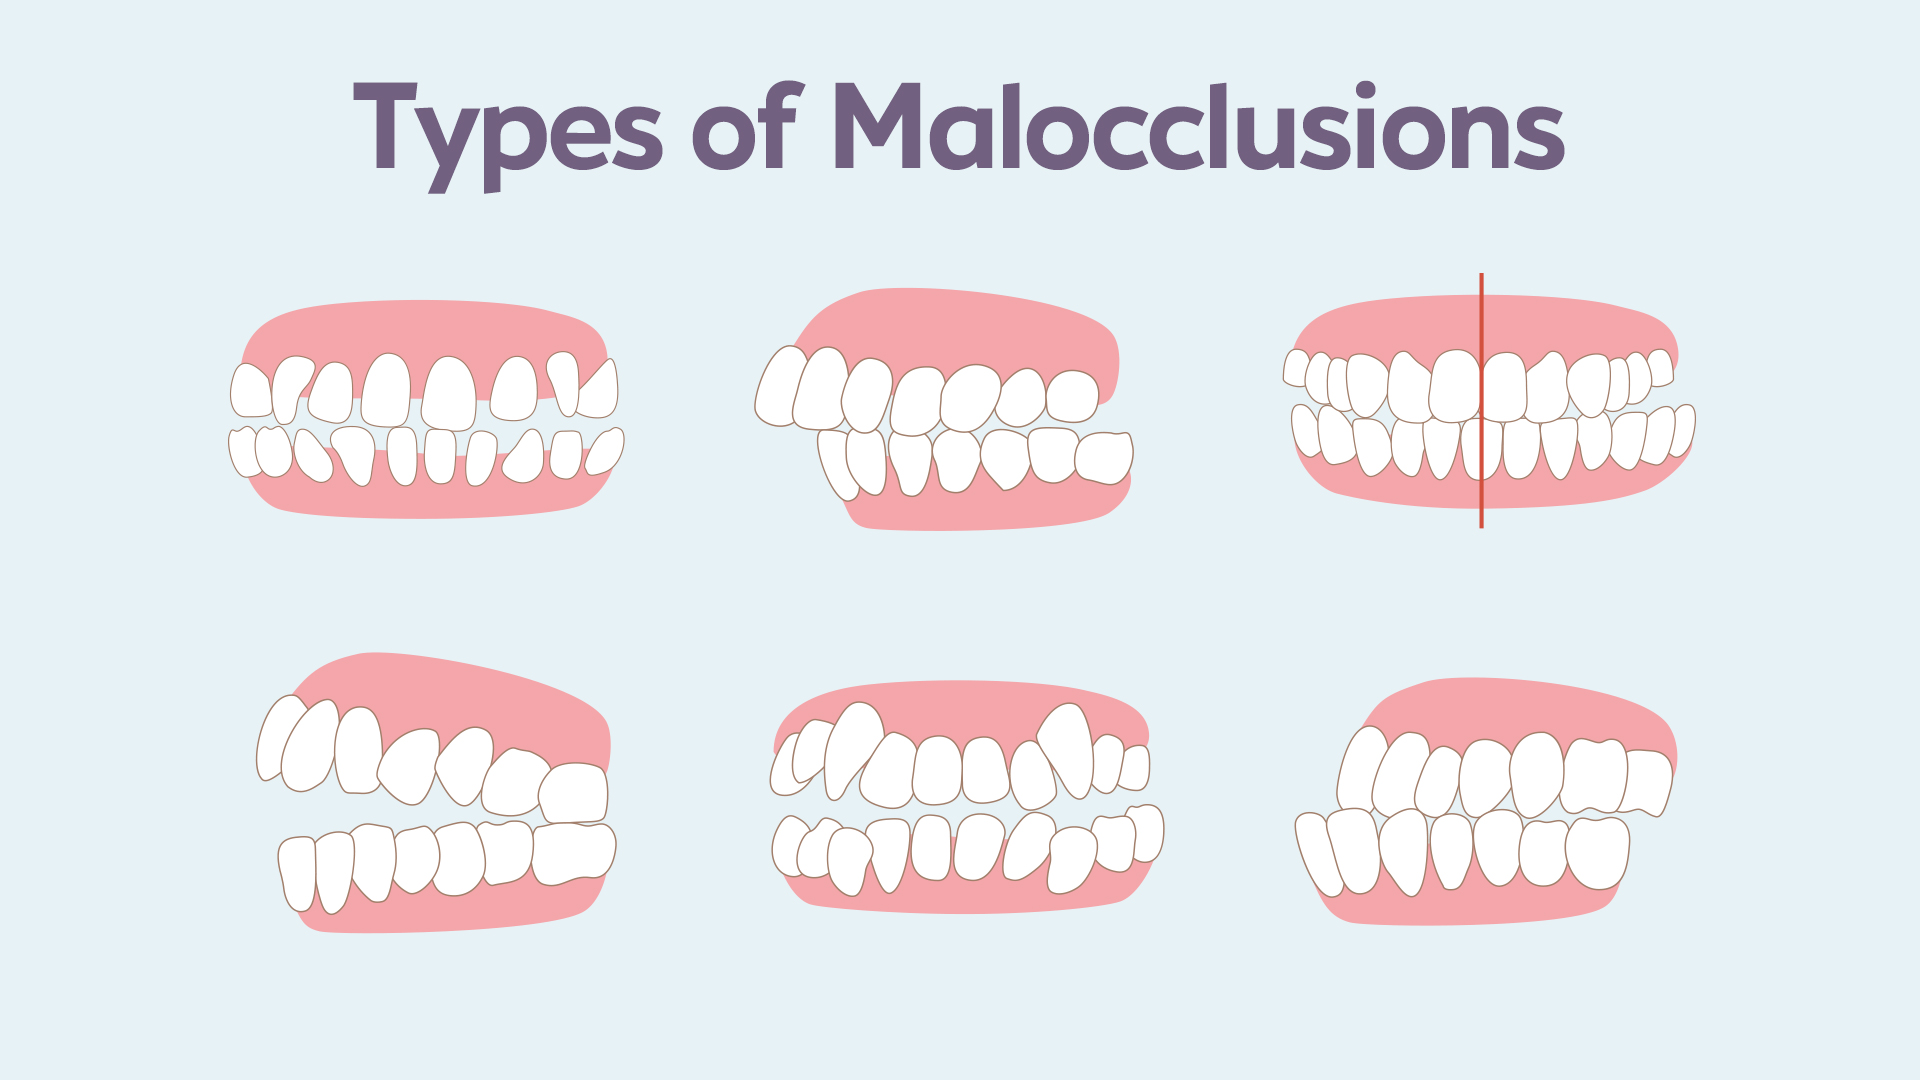 a diagram representing different types of malocclusion